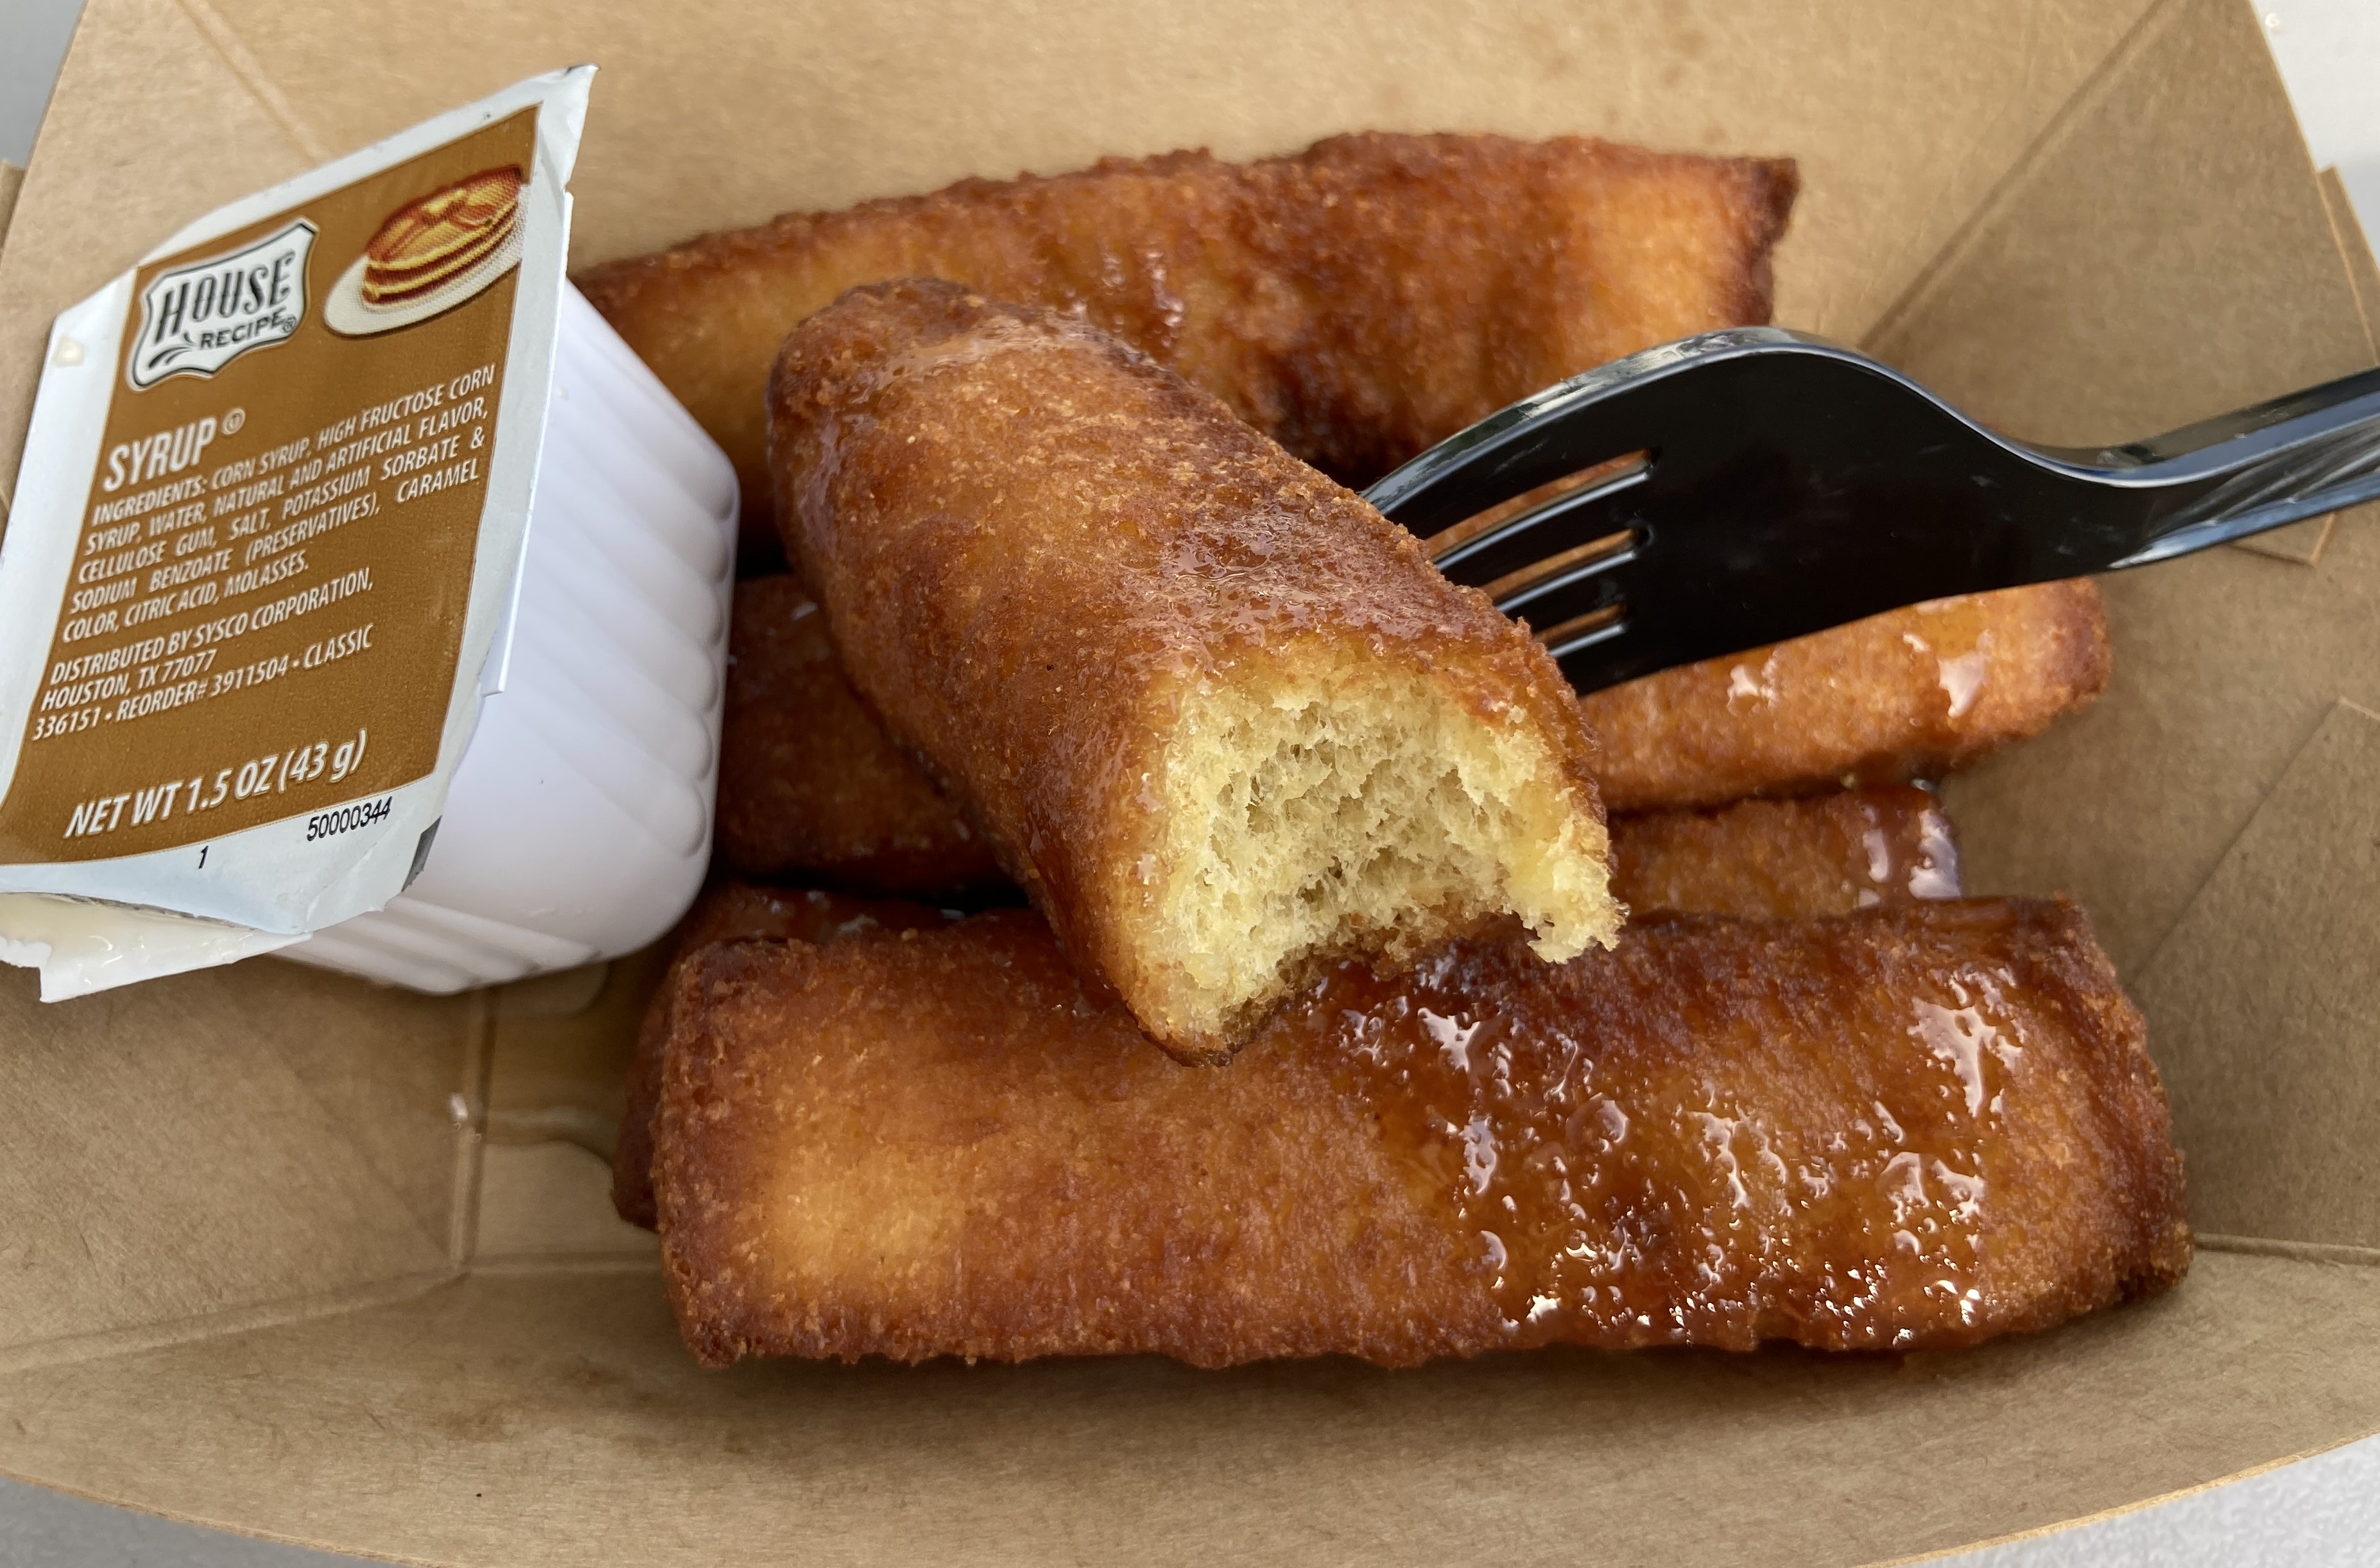 French toast sticks at Bosco's at the New York State Fair.